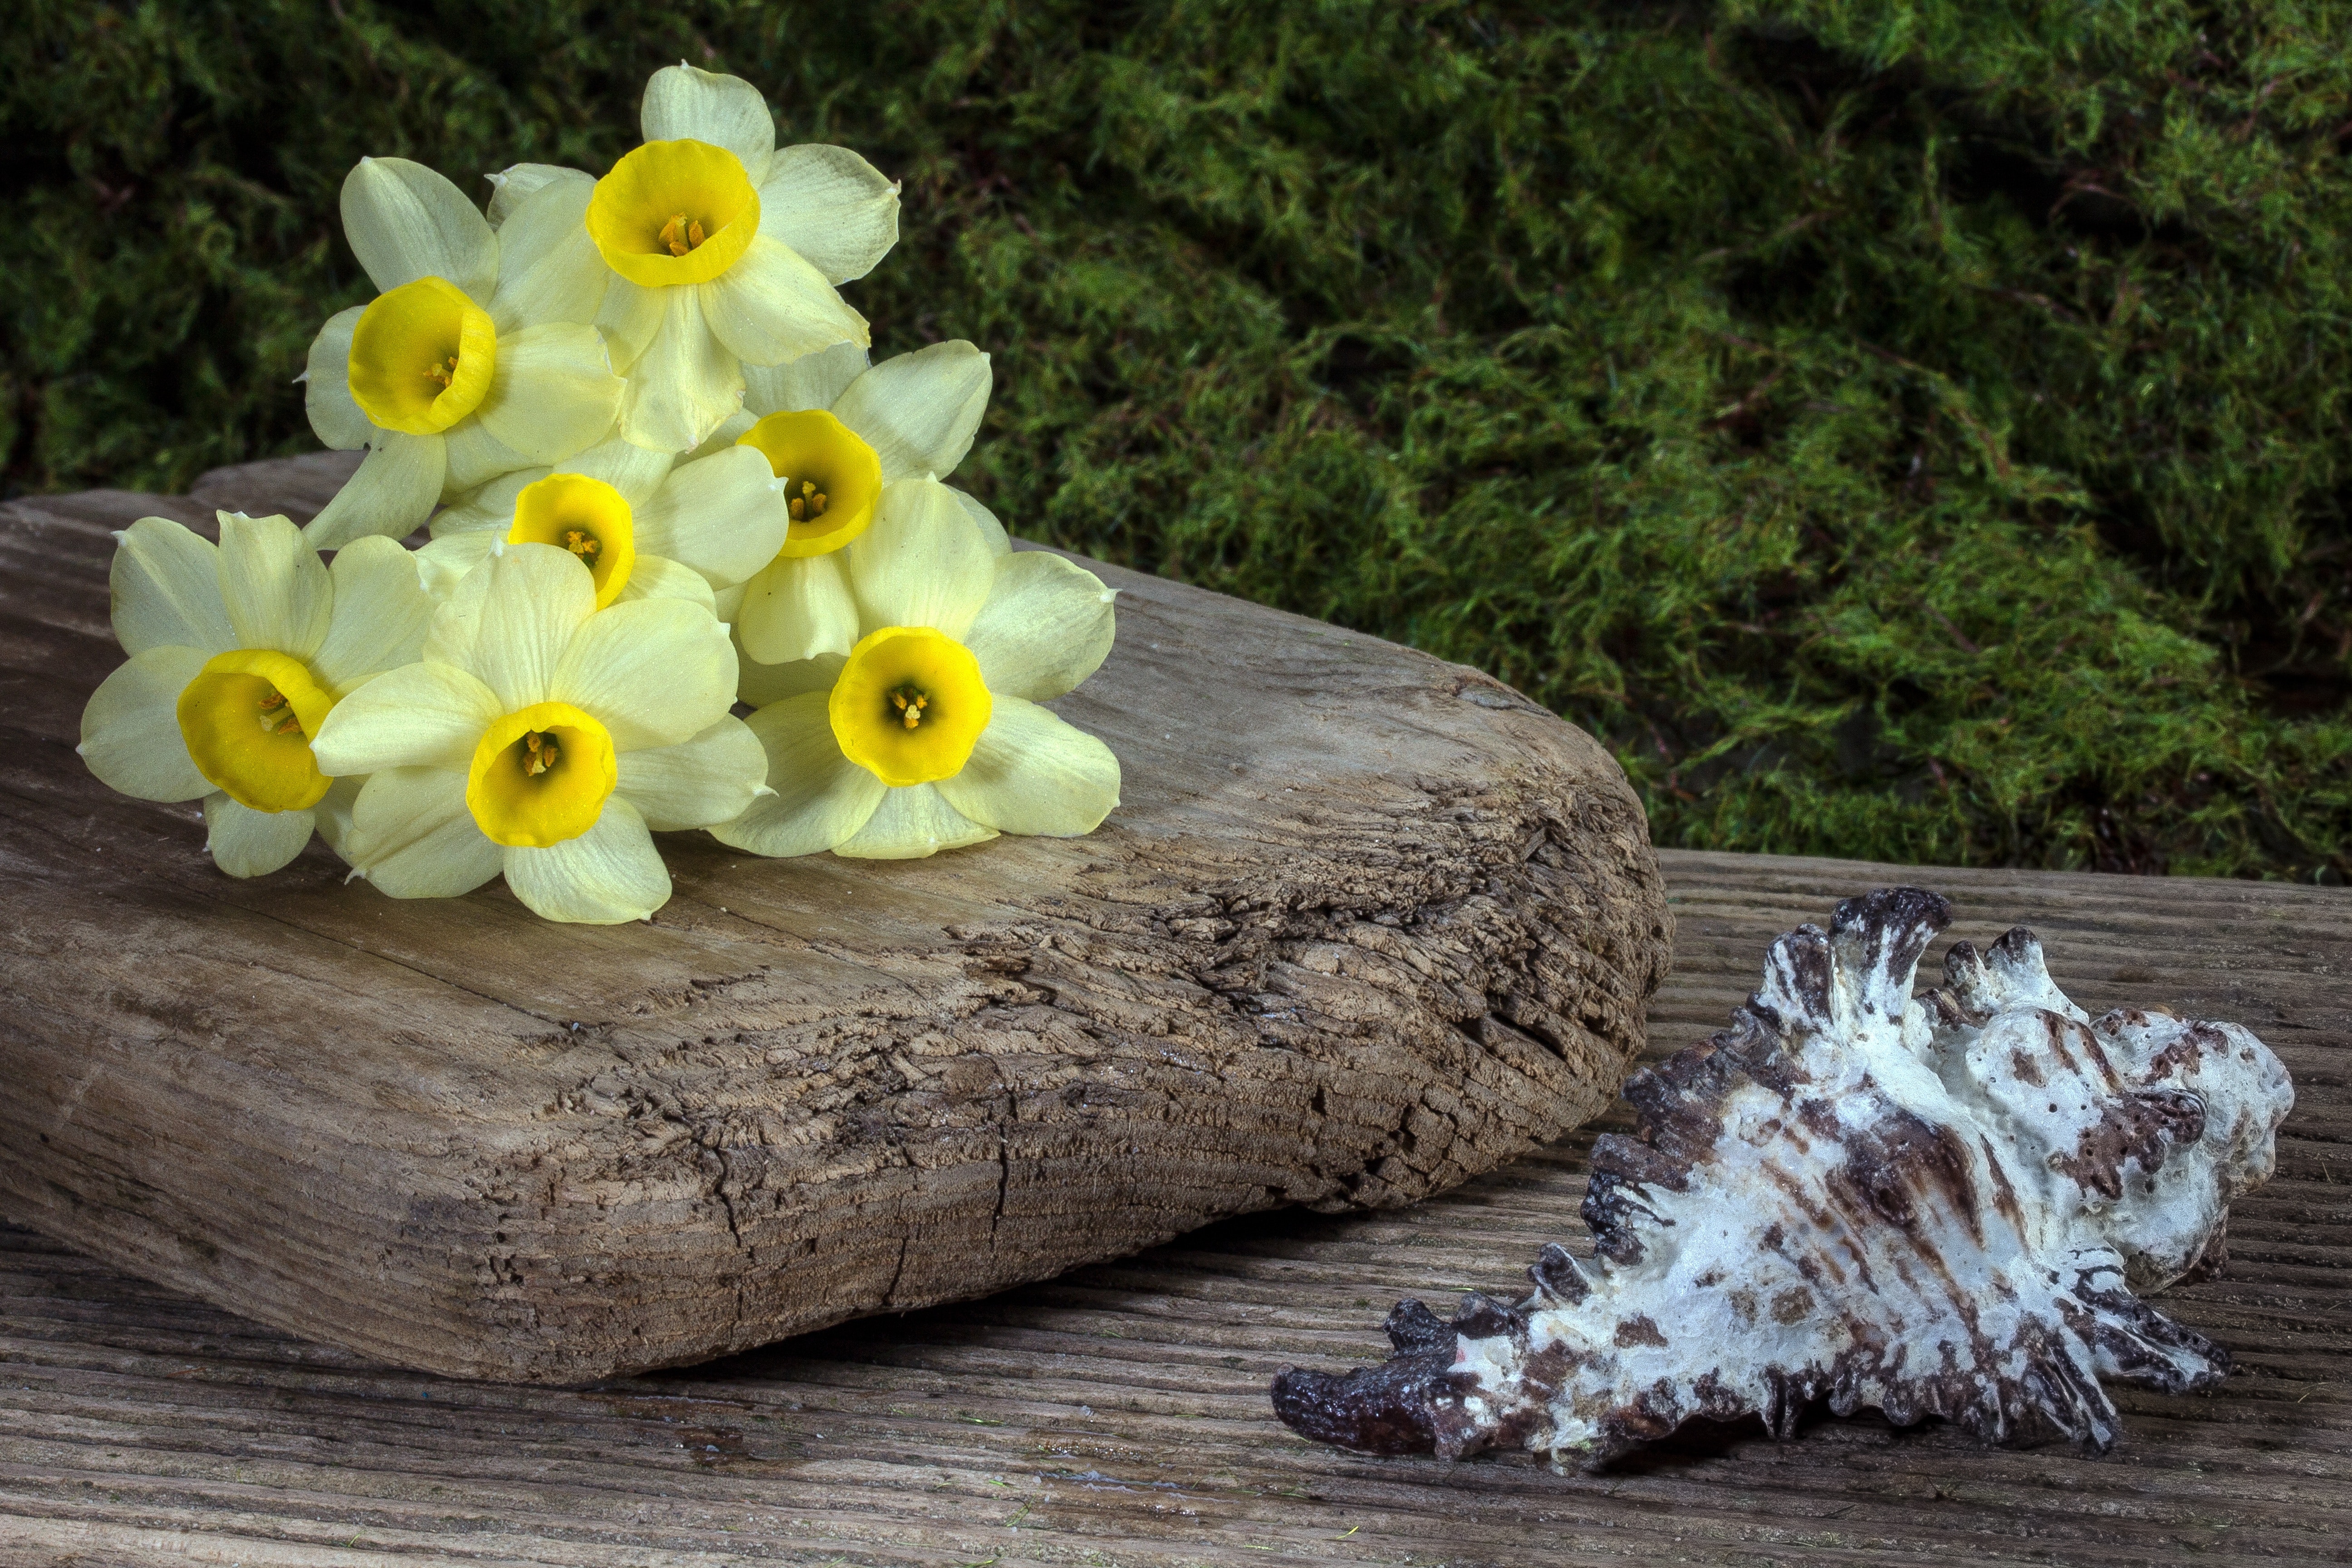 Yellow flower on wooden plank beside white shell photo